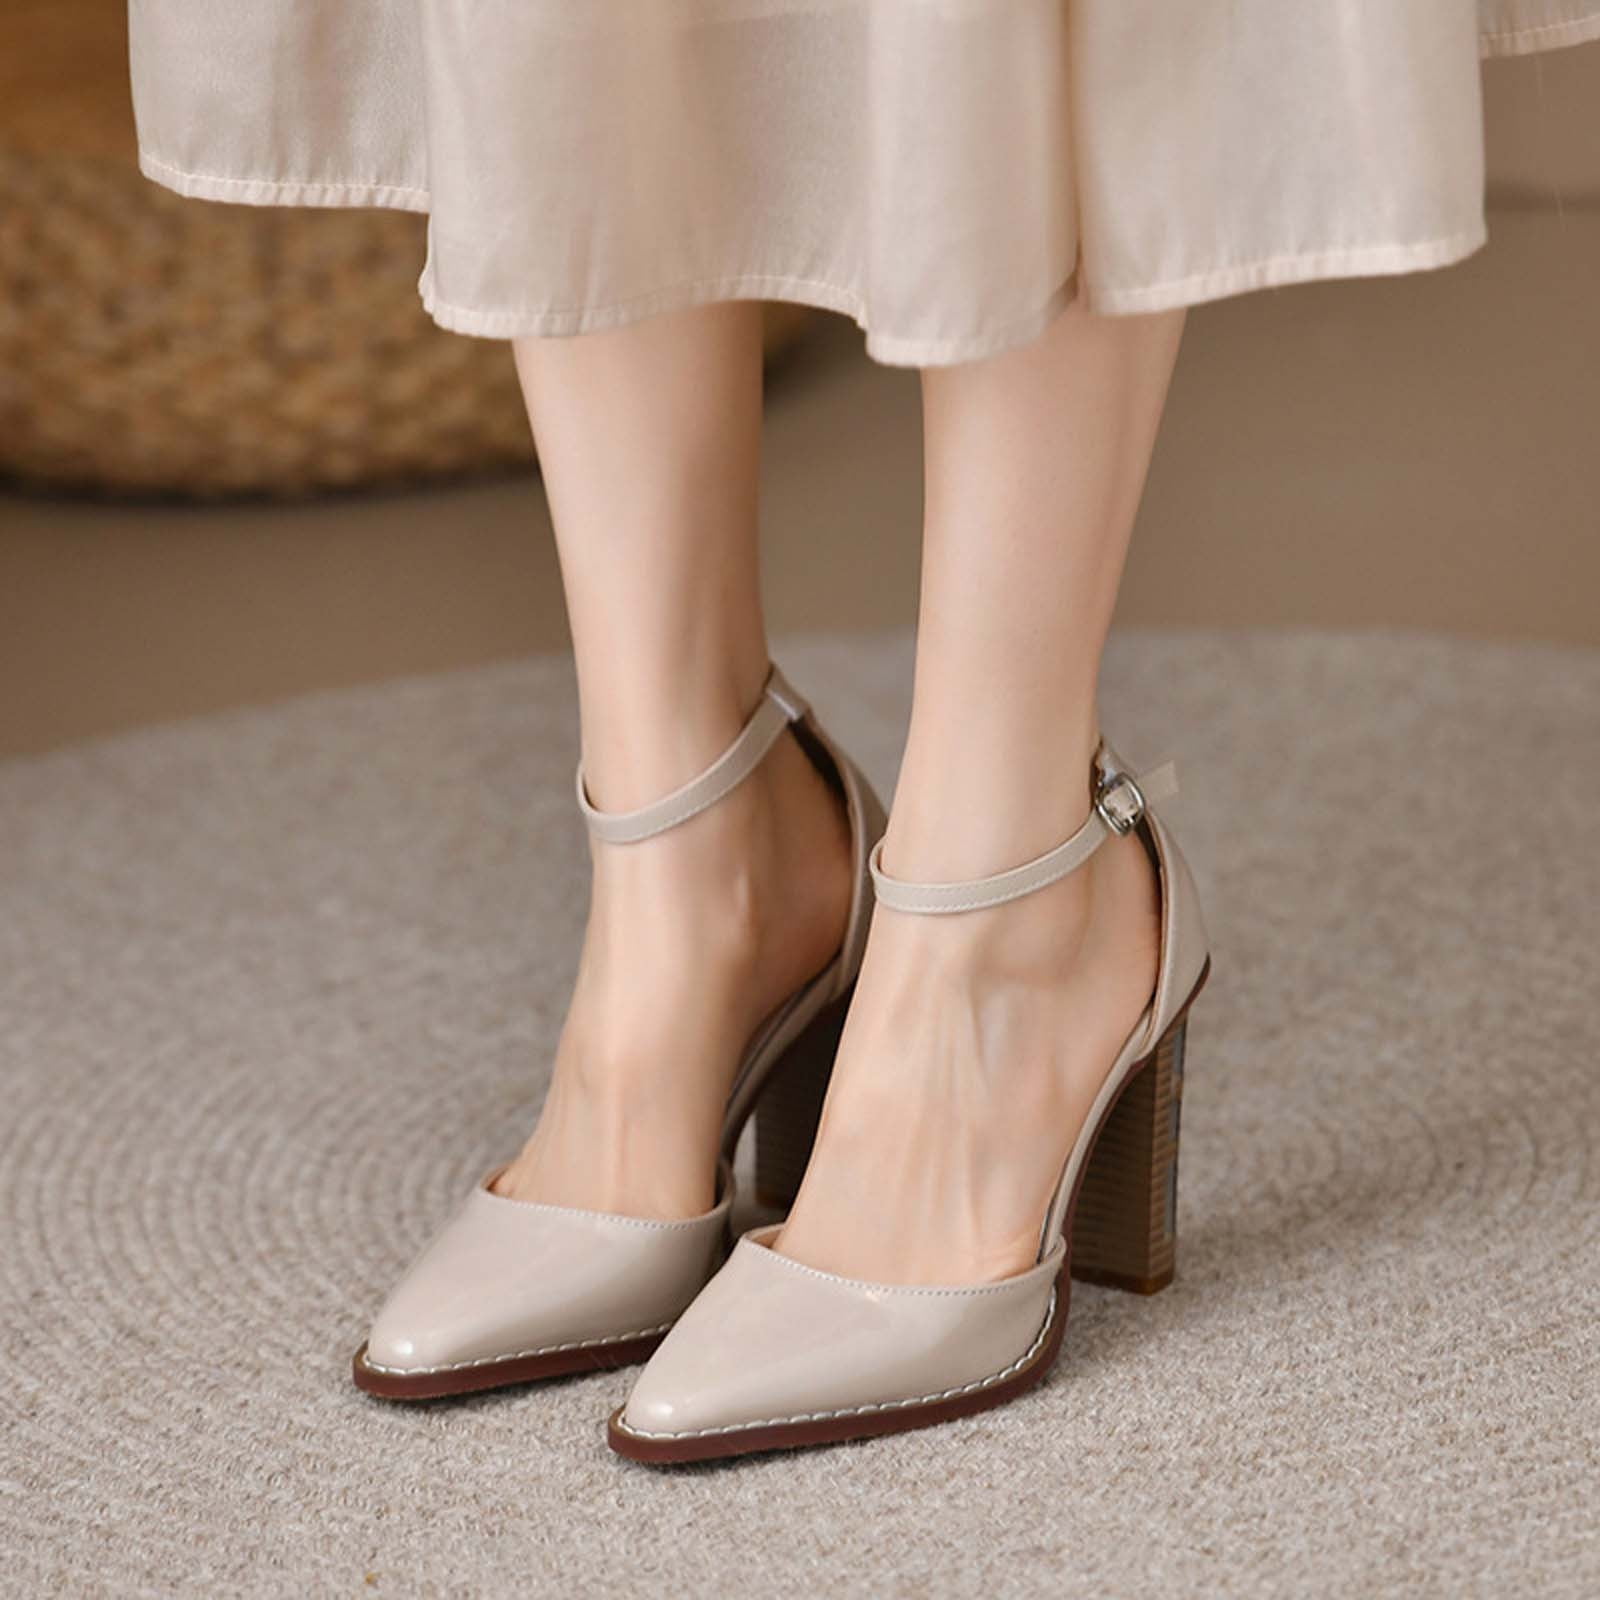 Chunky heels to avoid that sinking feeling [updated!] • Offbeat Wed (was  Offbeat Bride)